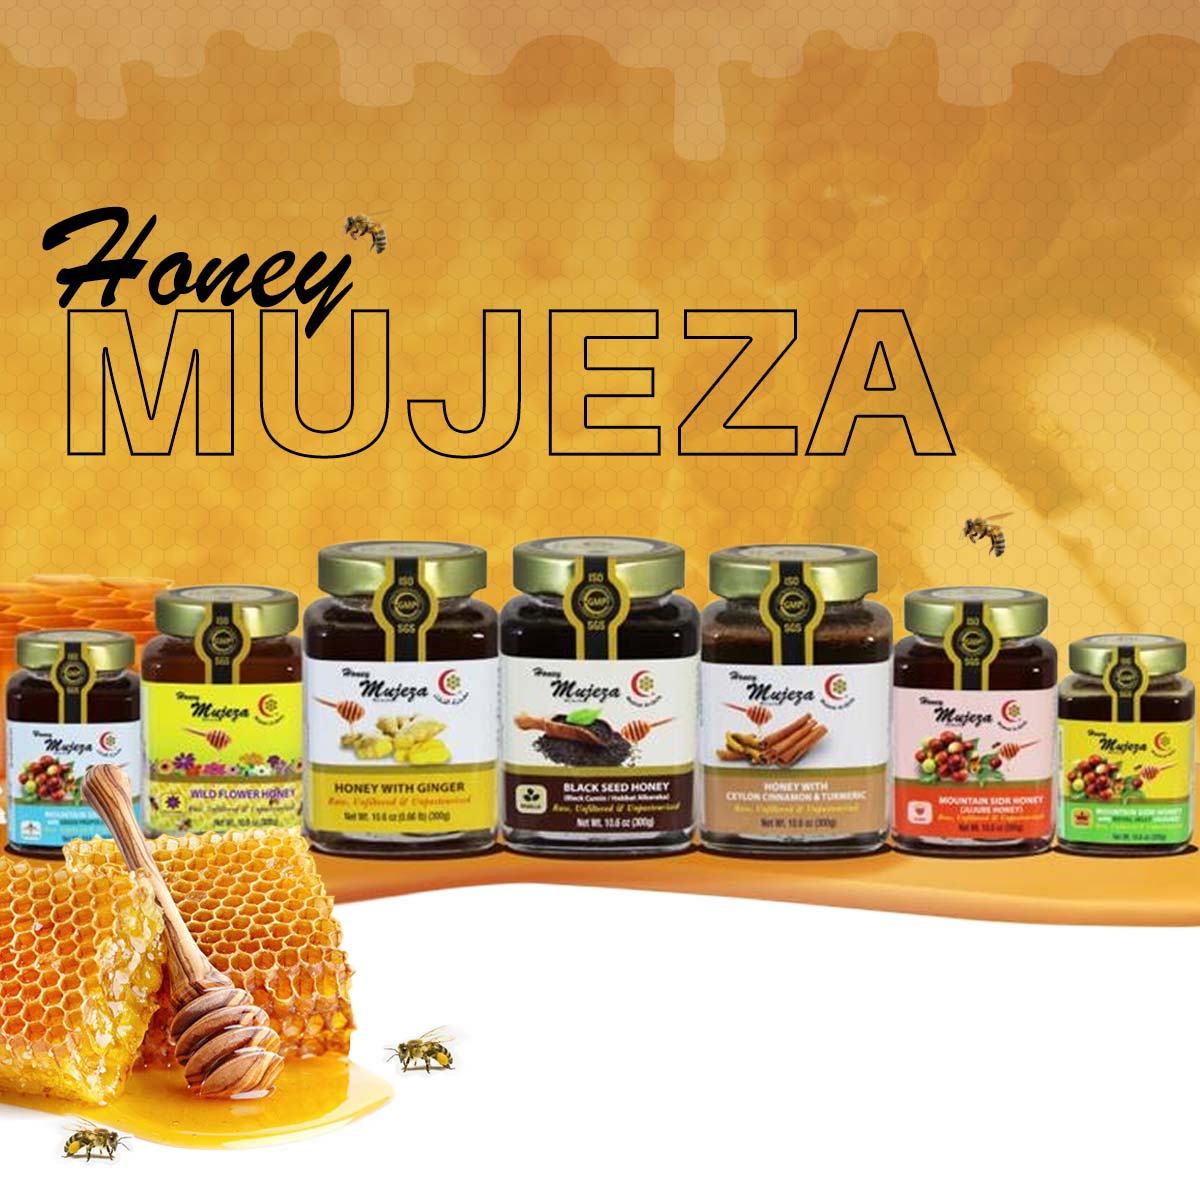 Mujeza Honey Store - Various Honey Products and tastes available for your plates